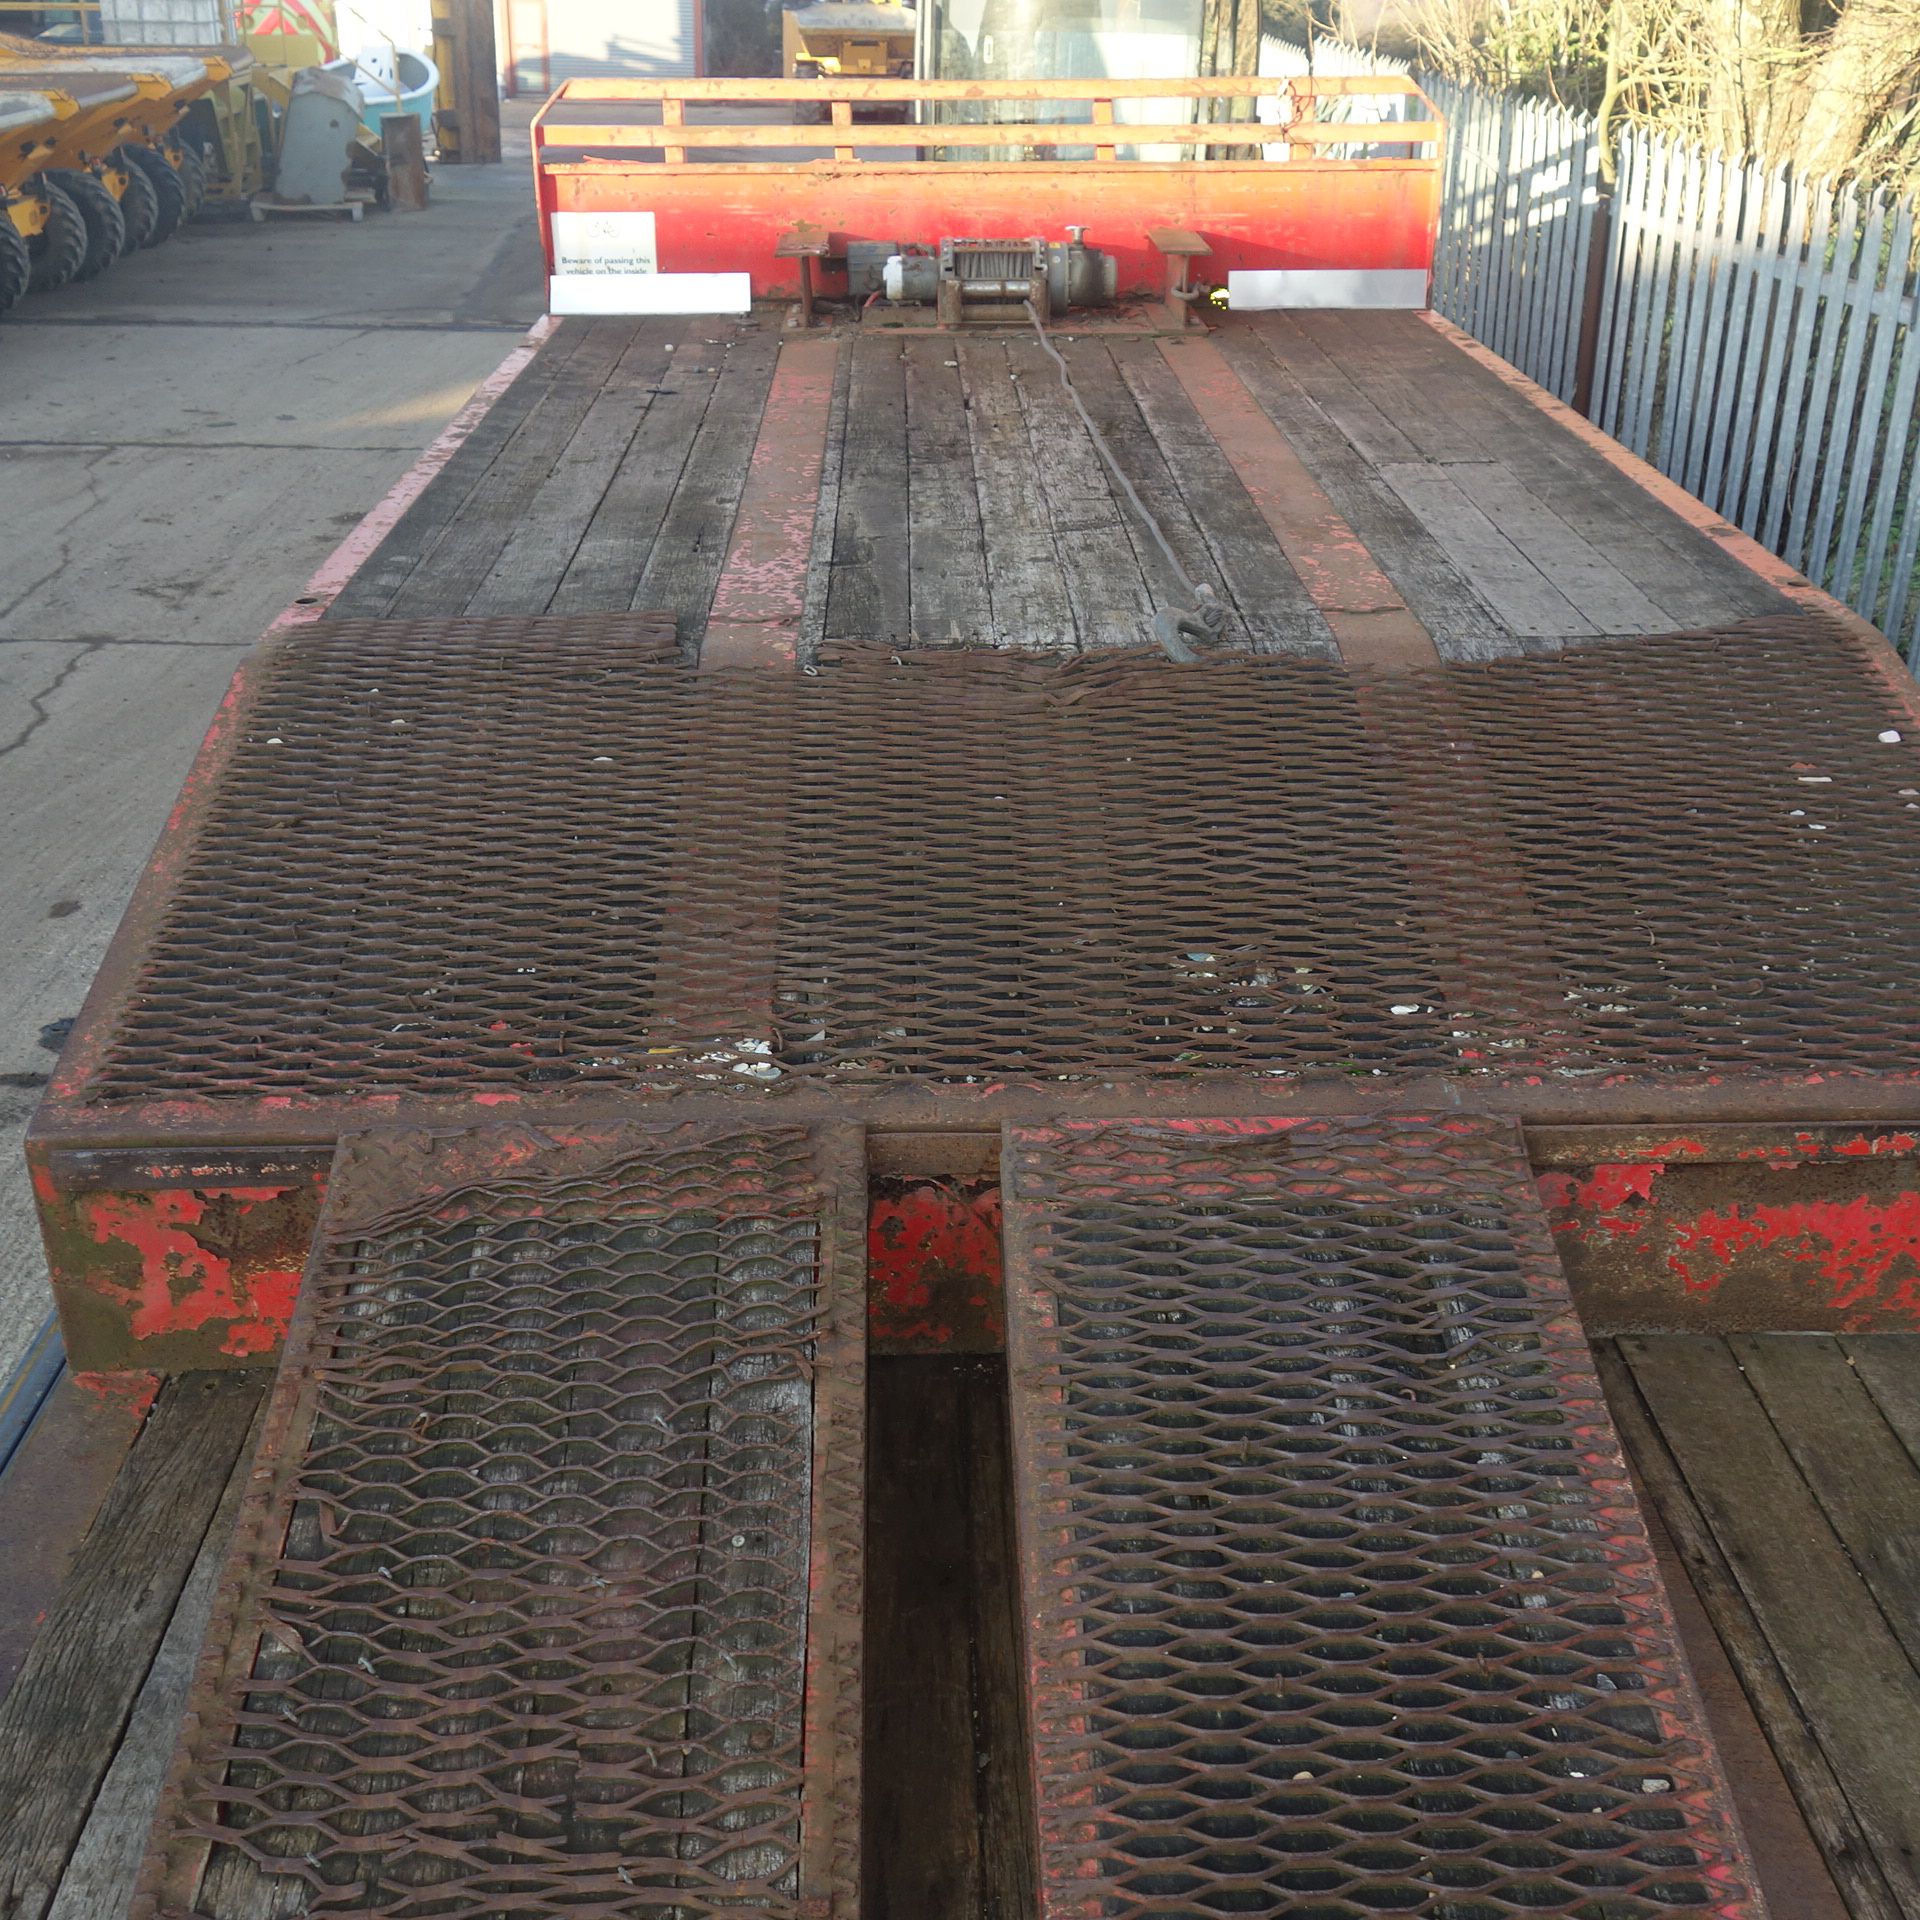 2008 Mac Low Loader 3 Axle Trailer. - Image 3 of 6